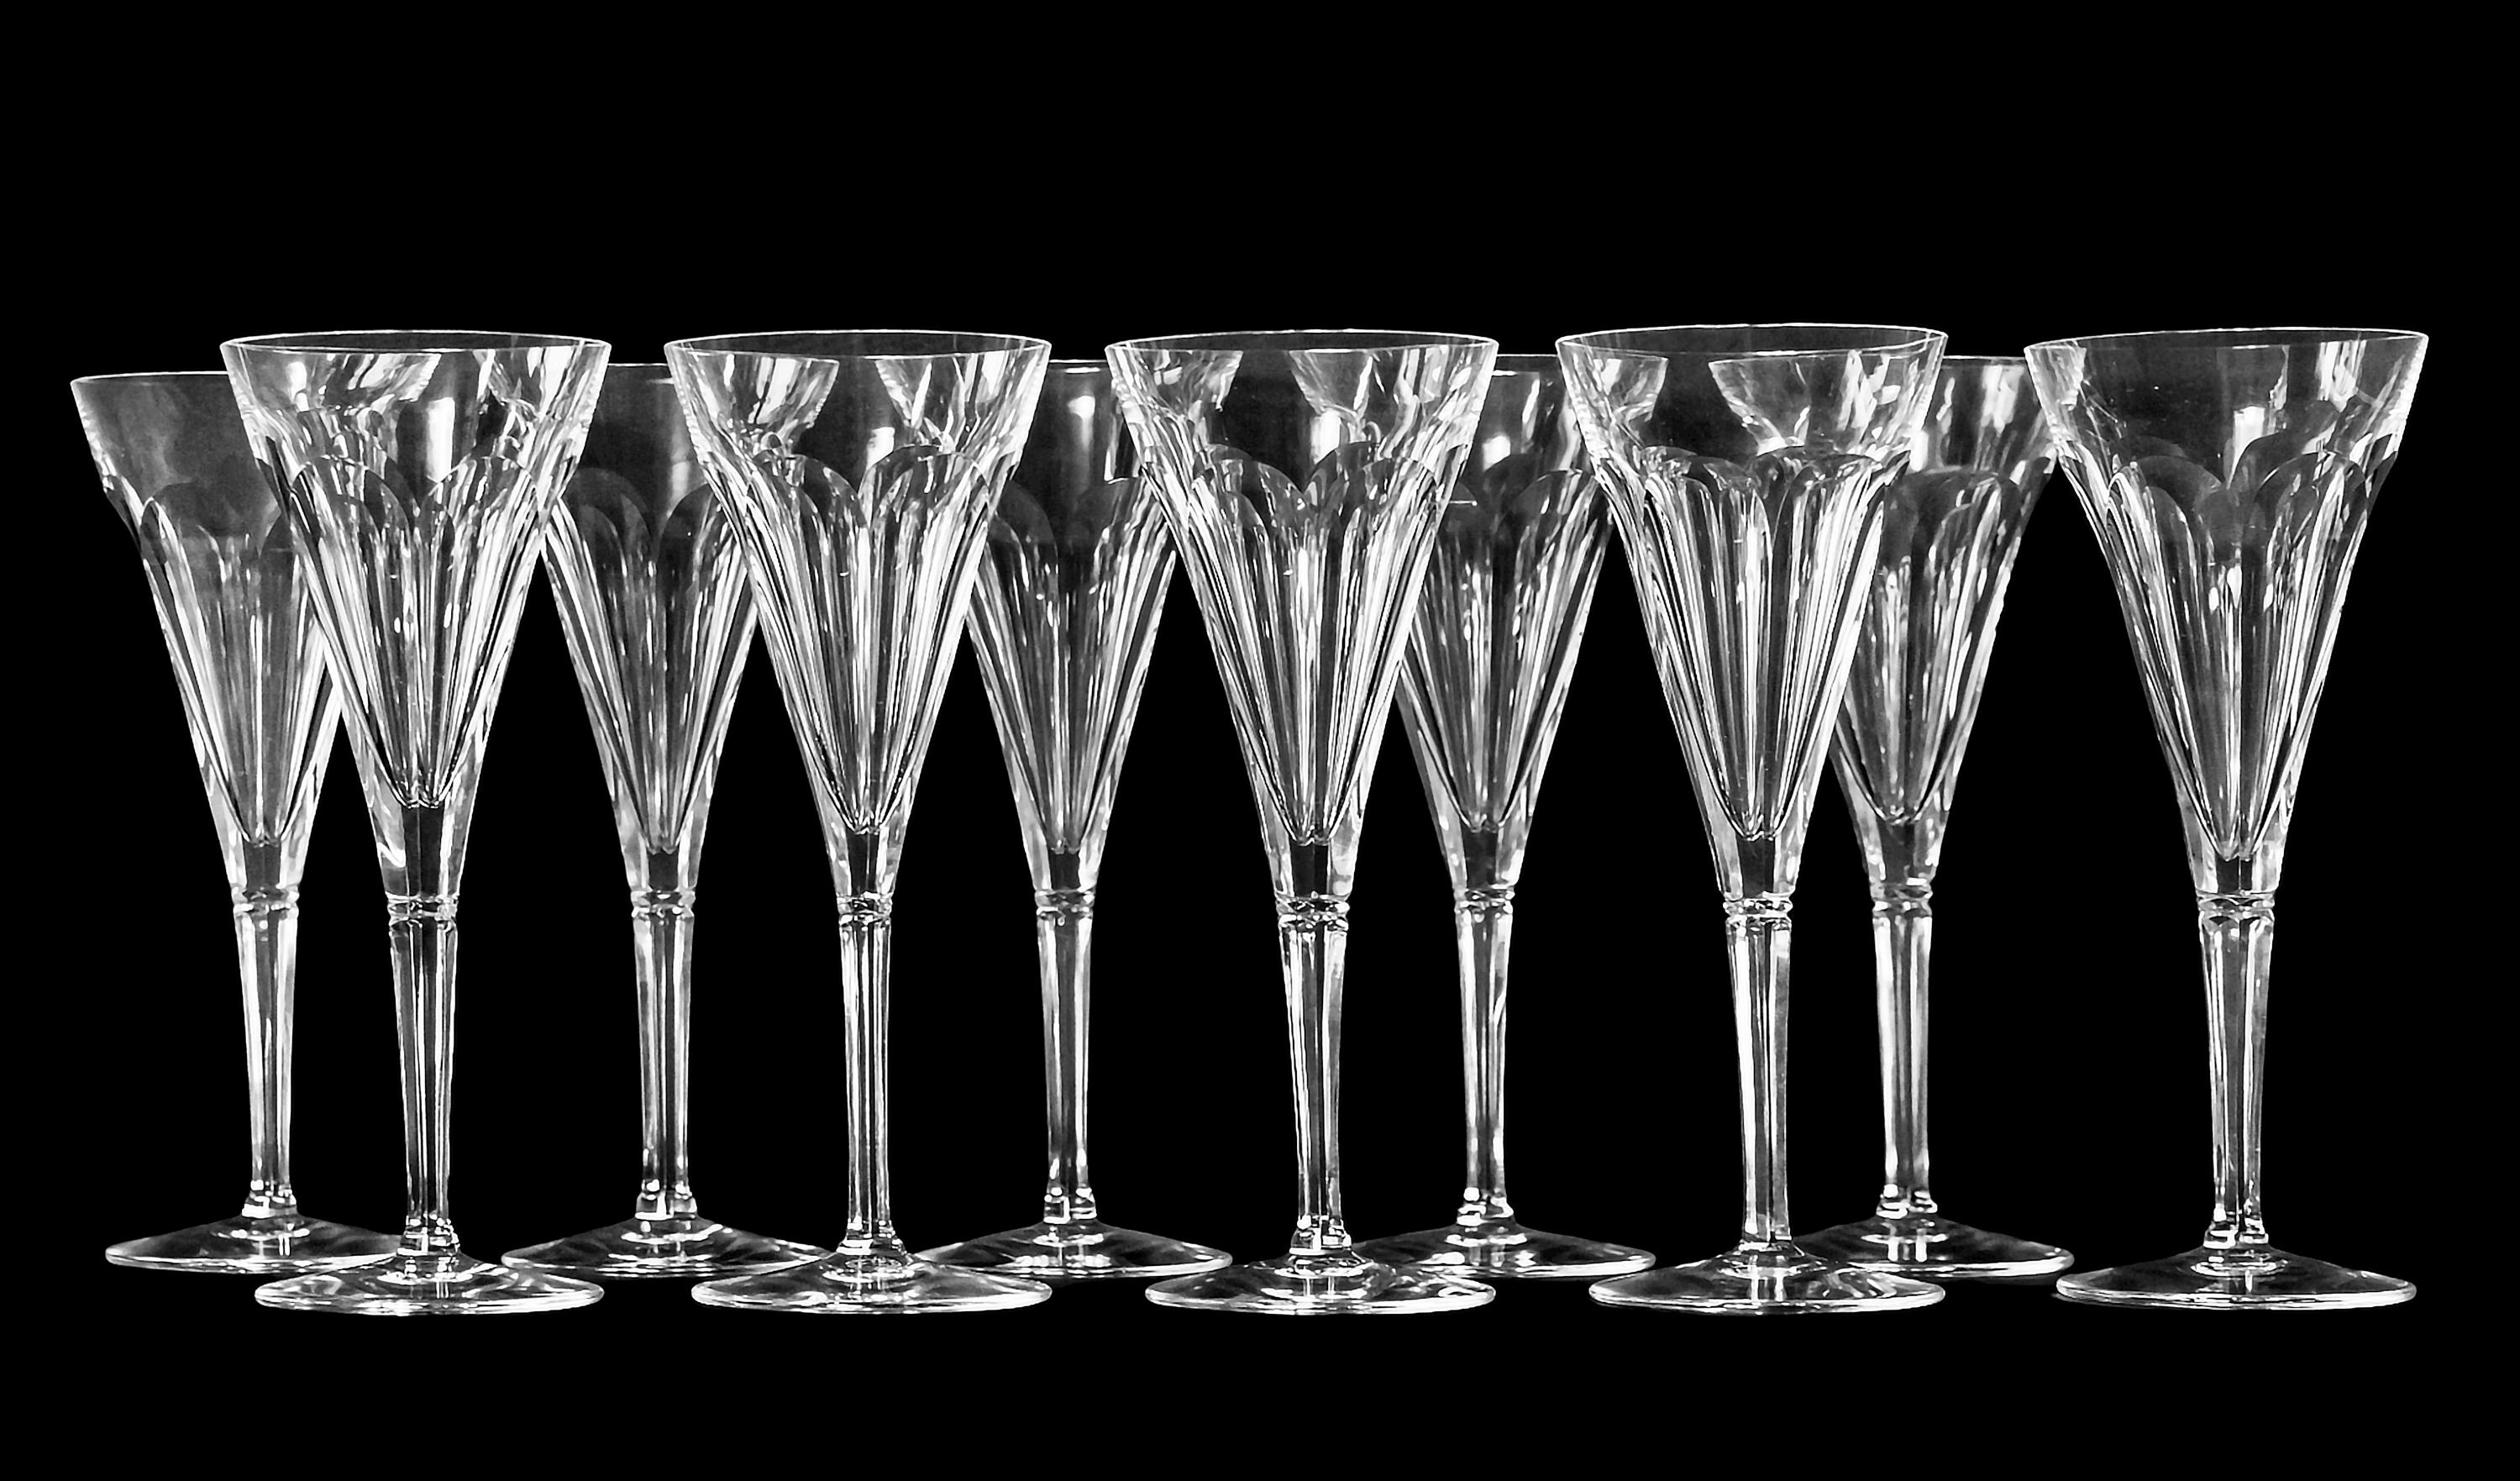 Set of 10 Baccarat Duchesse de Dino collection champagne crystal flutes.
Marked on the bottom.
Excellent /like new condition.

